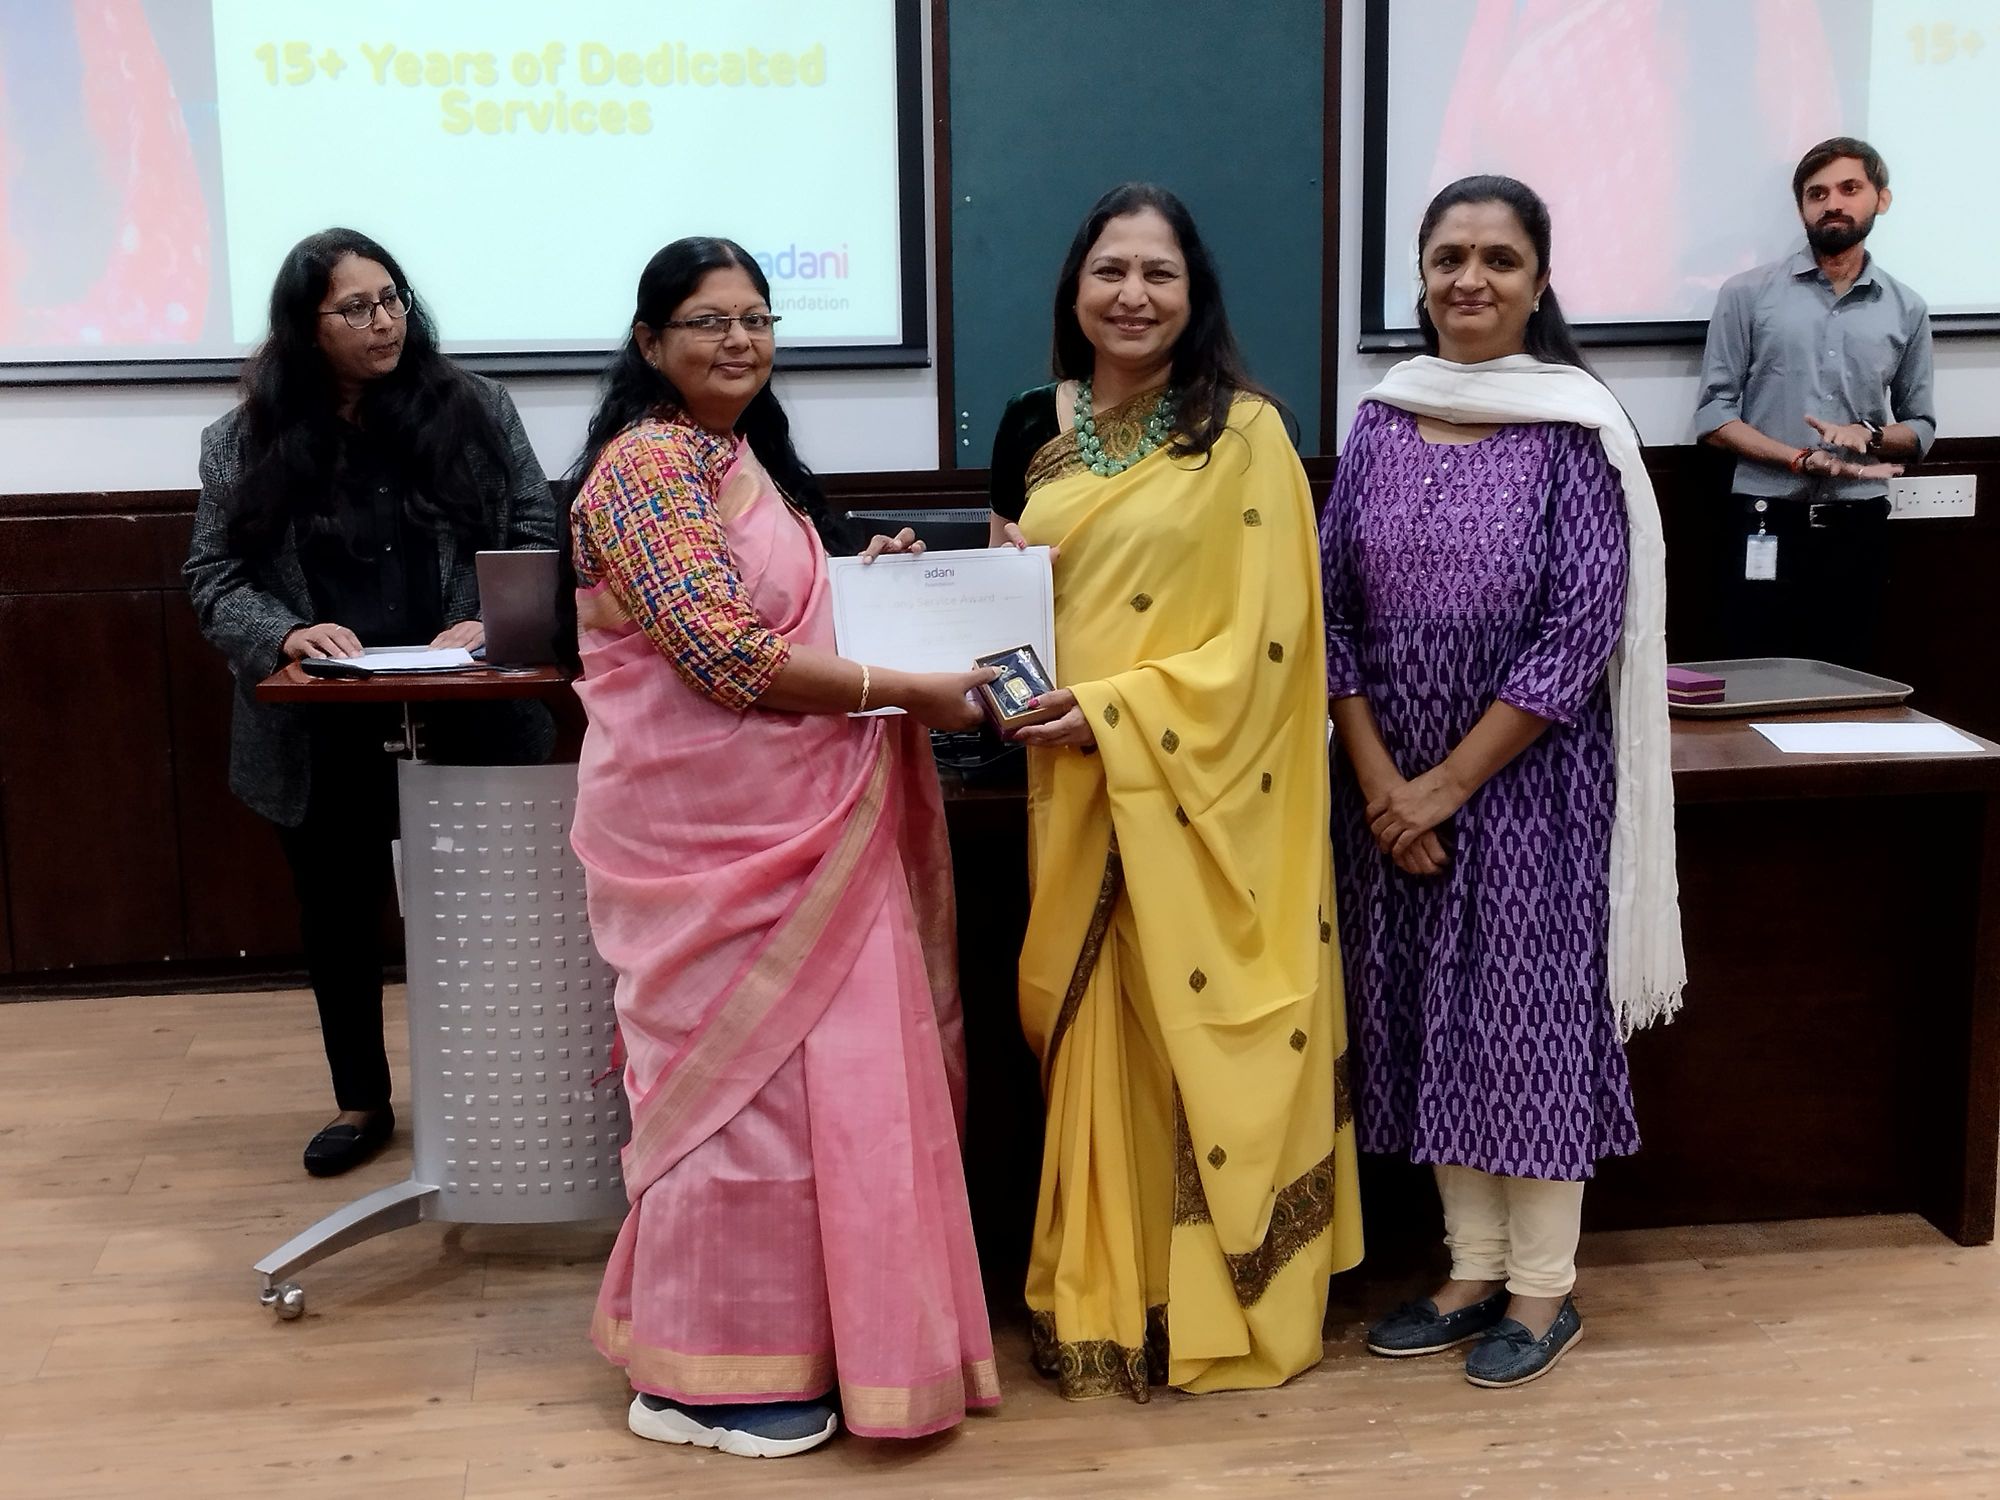 Chairperson Felicitates Long Service Awardees